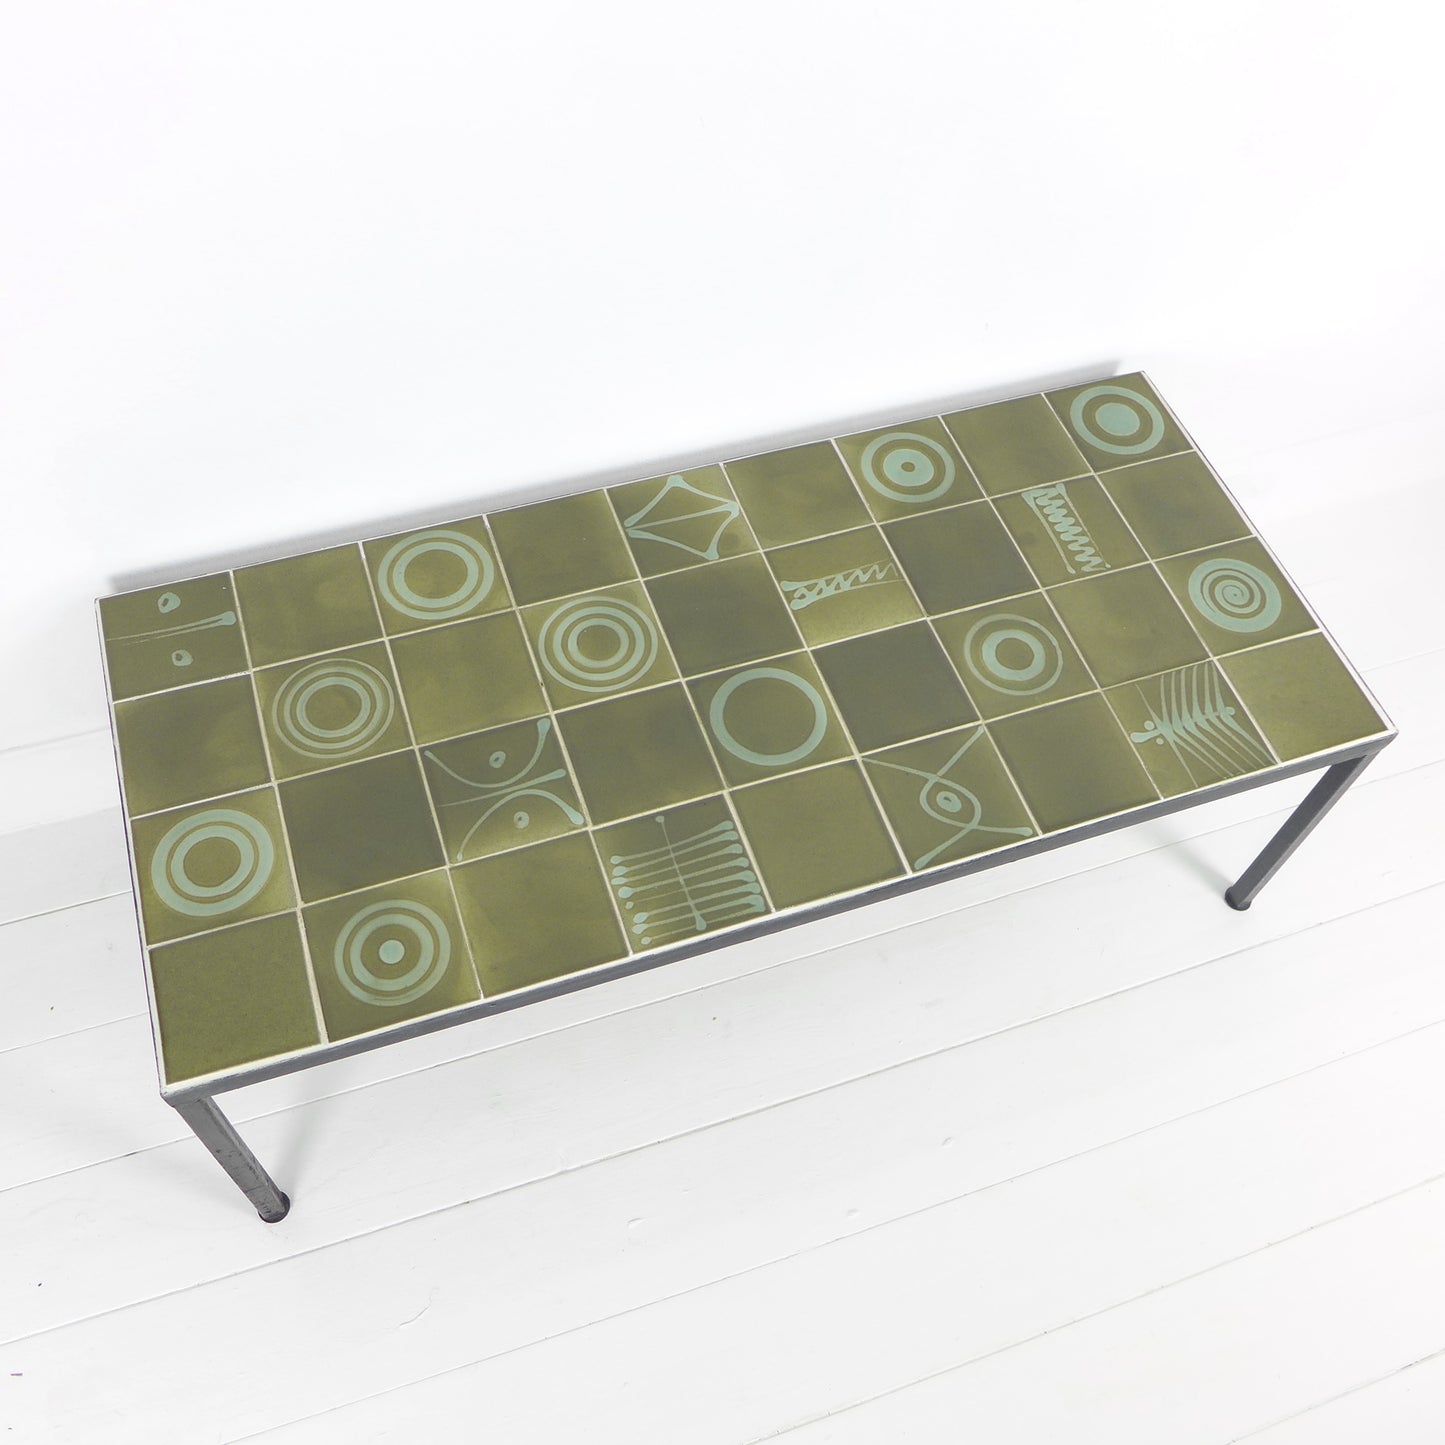 Mid Century Tile Top Coffee Table - Green Geometric Abstract Designs